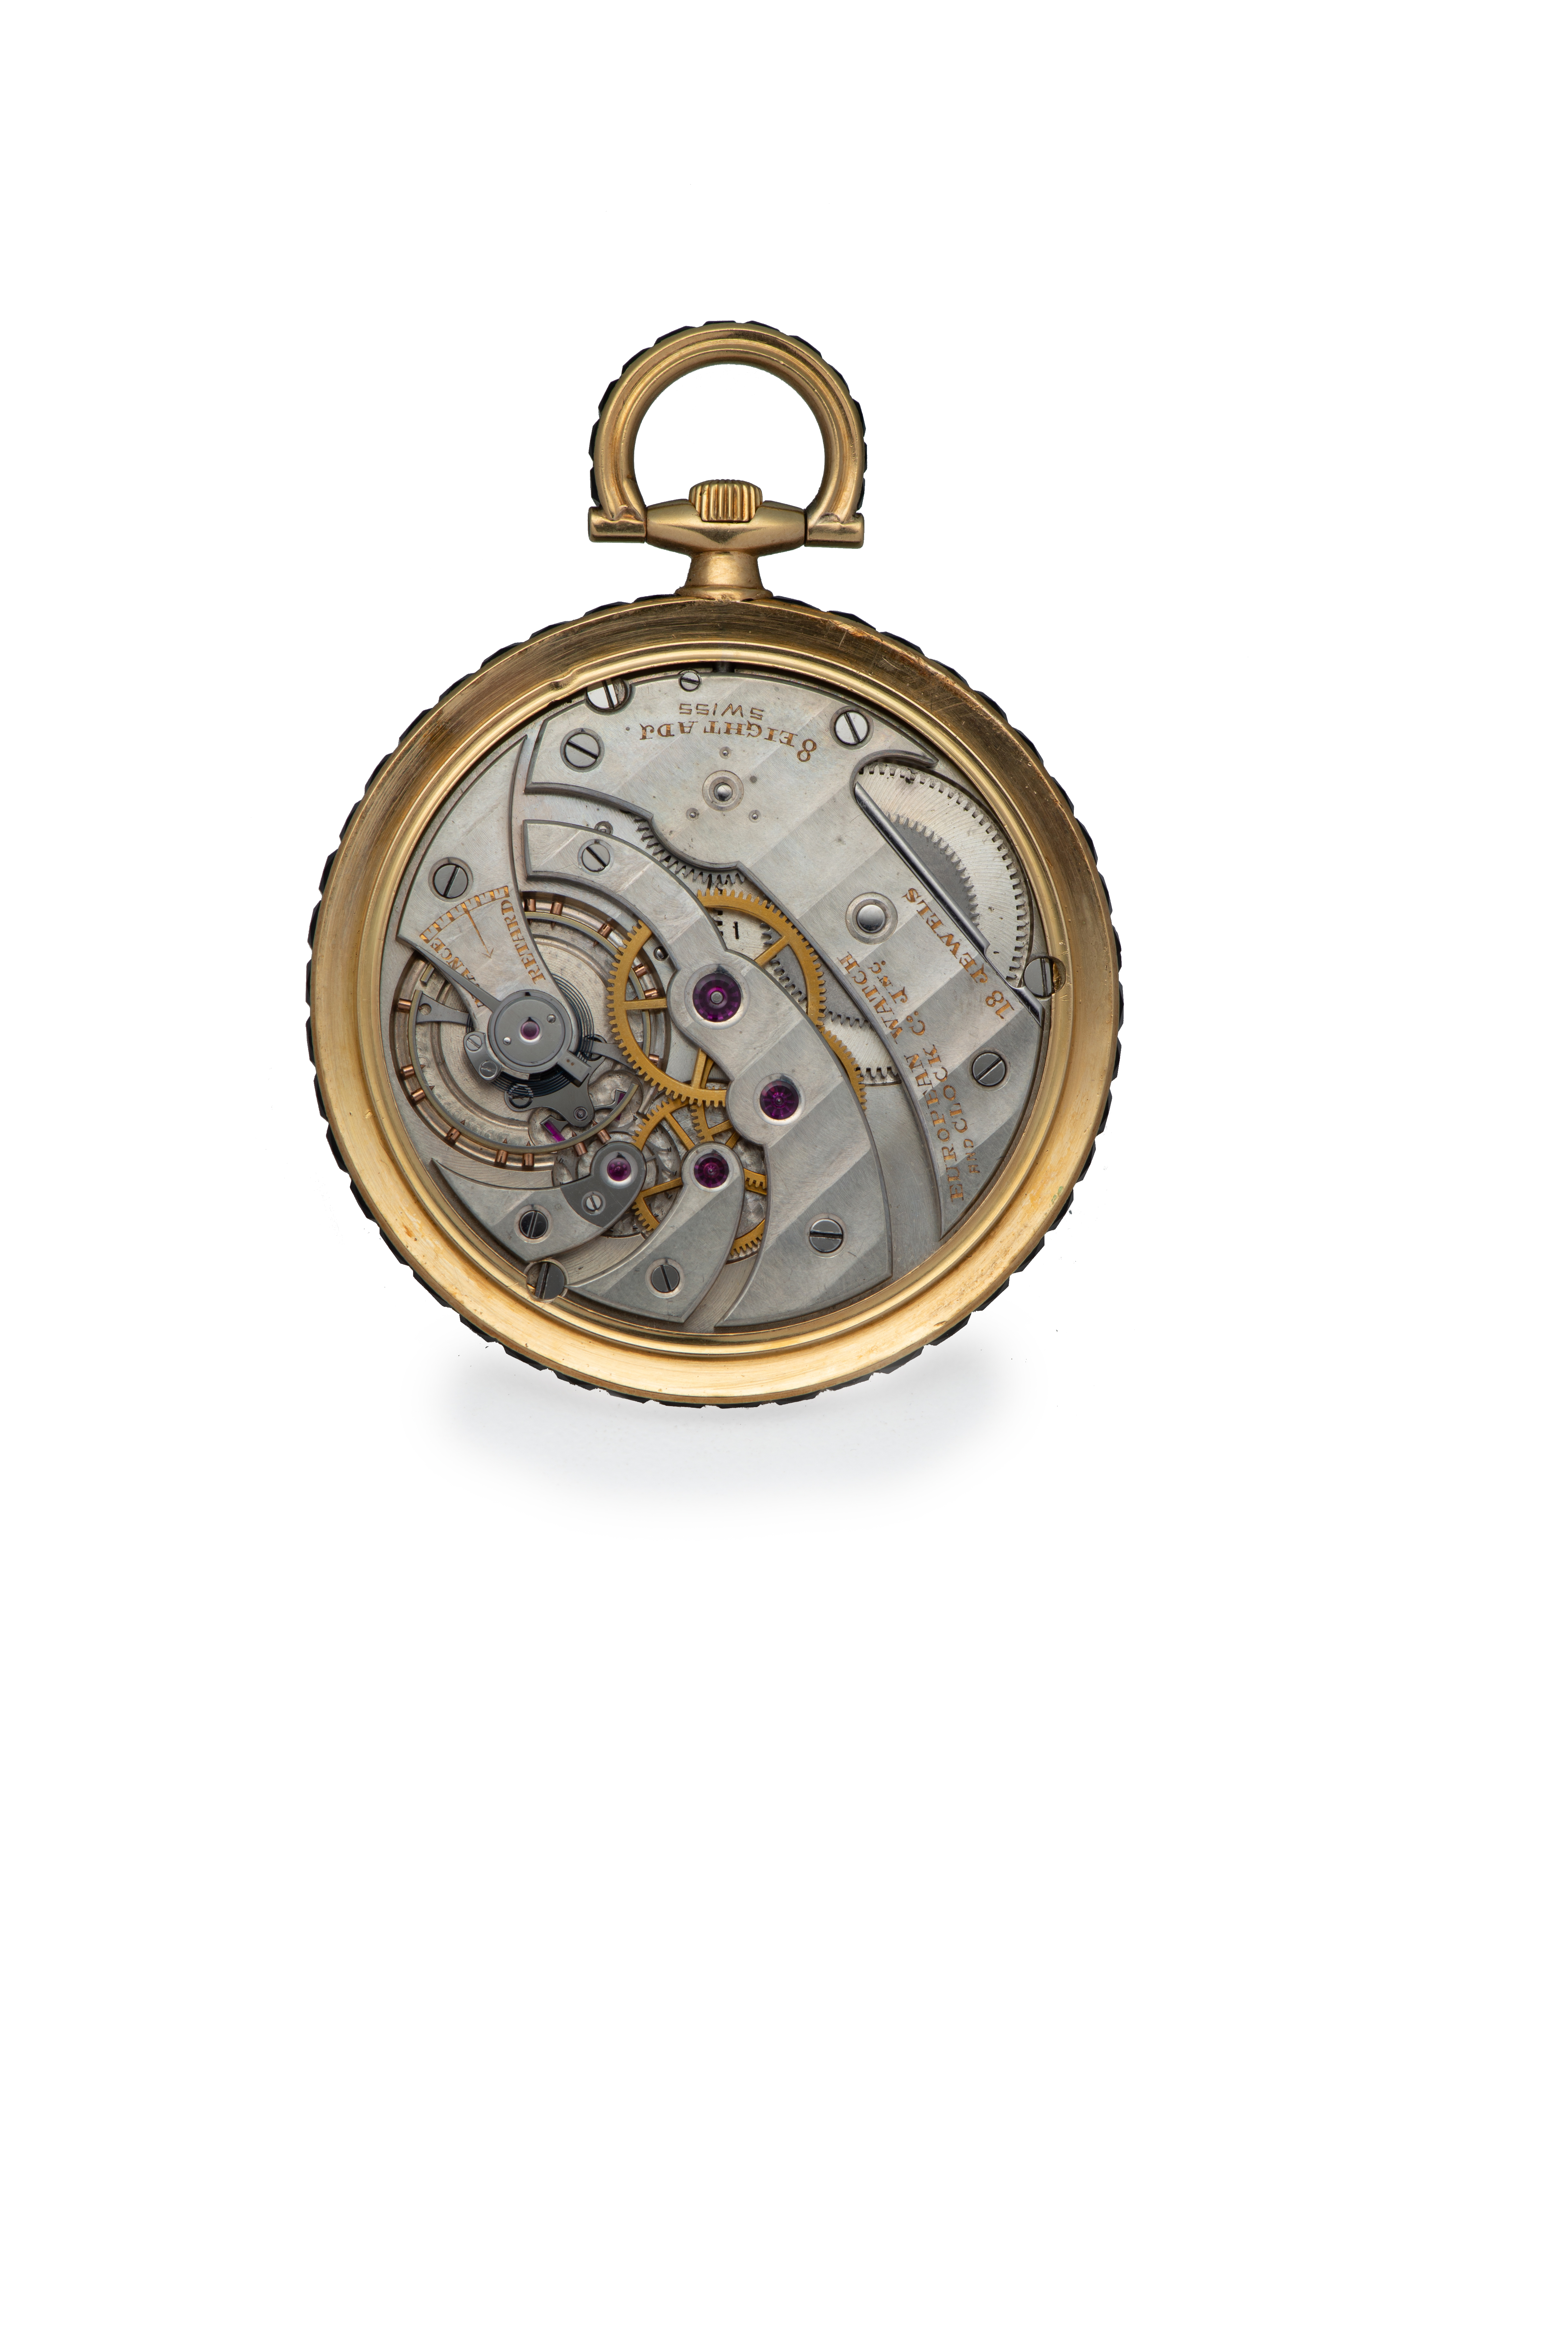 CARTIER, DRESS POCKET WATCH, “THE ARISTIDE BRIAND GIFT », YELLOW GOLD. Fine, rare [...] - Image 3 of 3